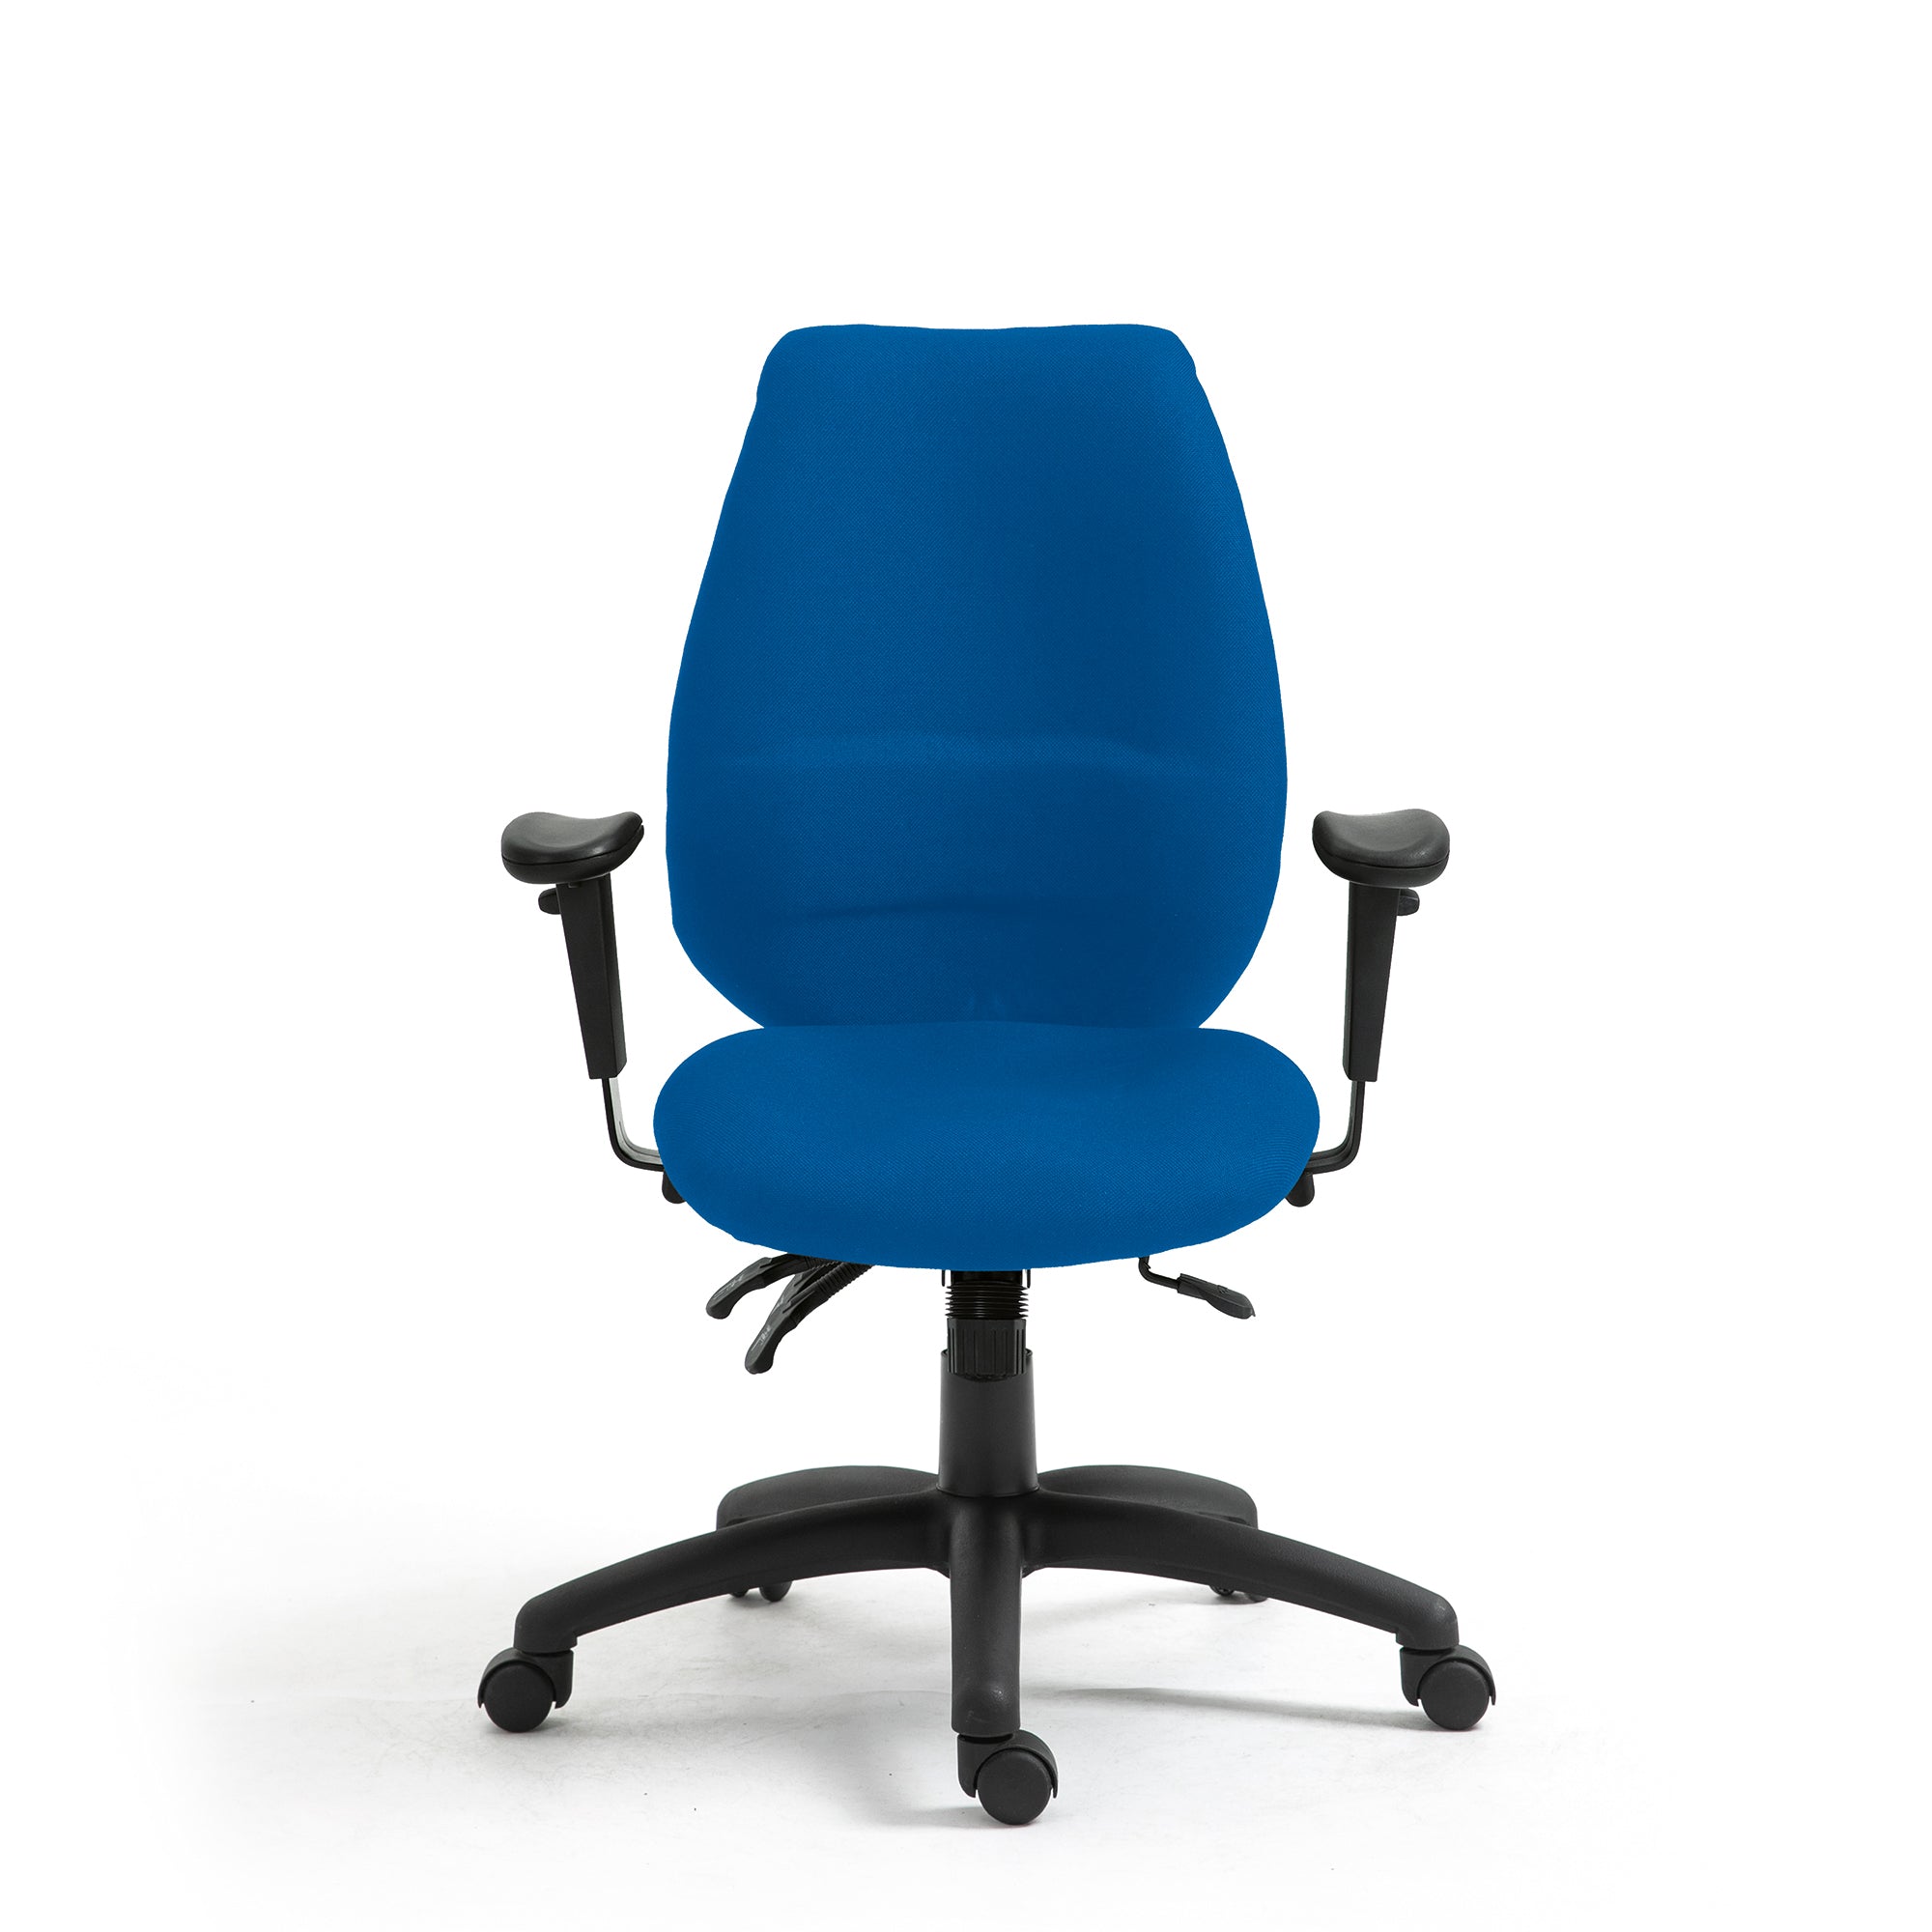 Thames – Ergonomic High Back 24 Hour Multi-Functional Synchronous Operator Chair with Multi-Adjustable Arms